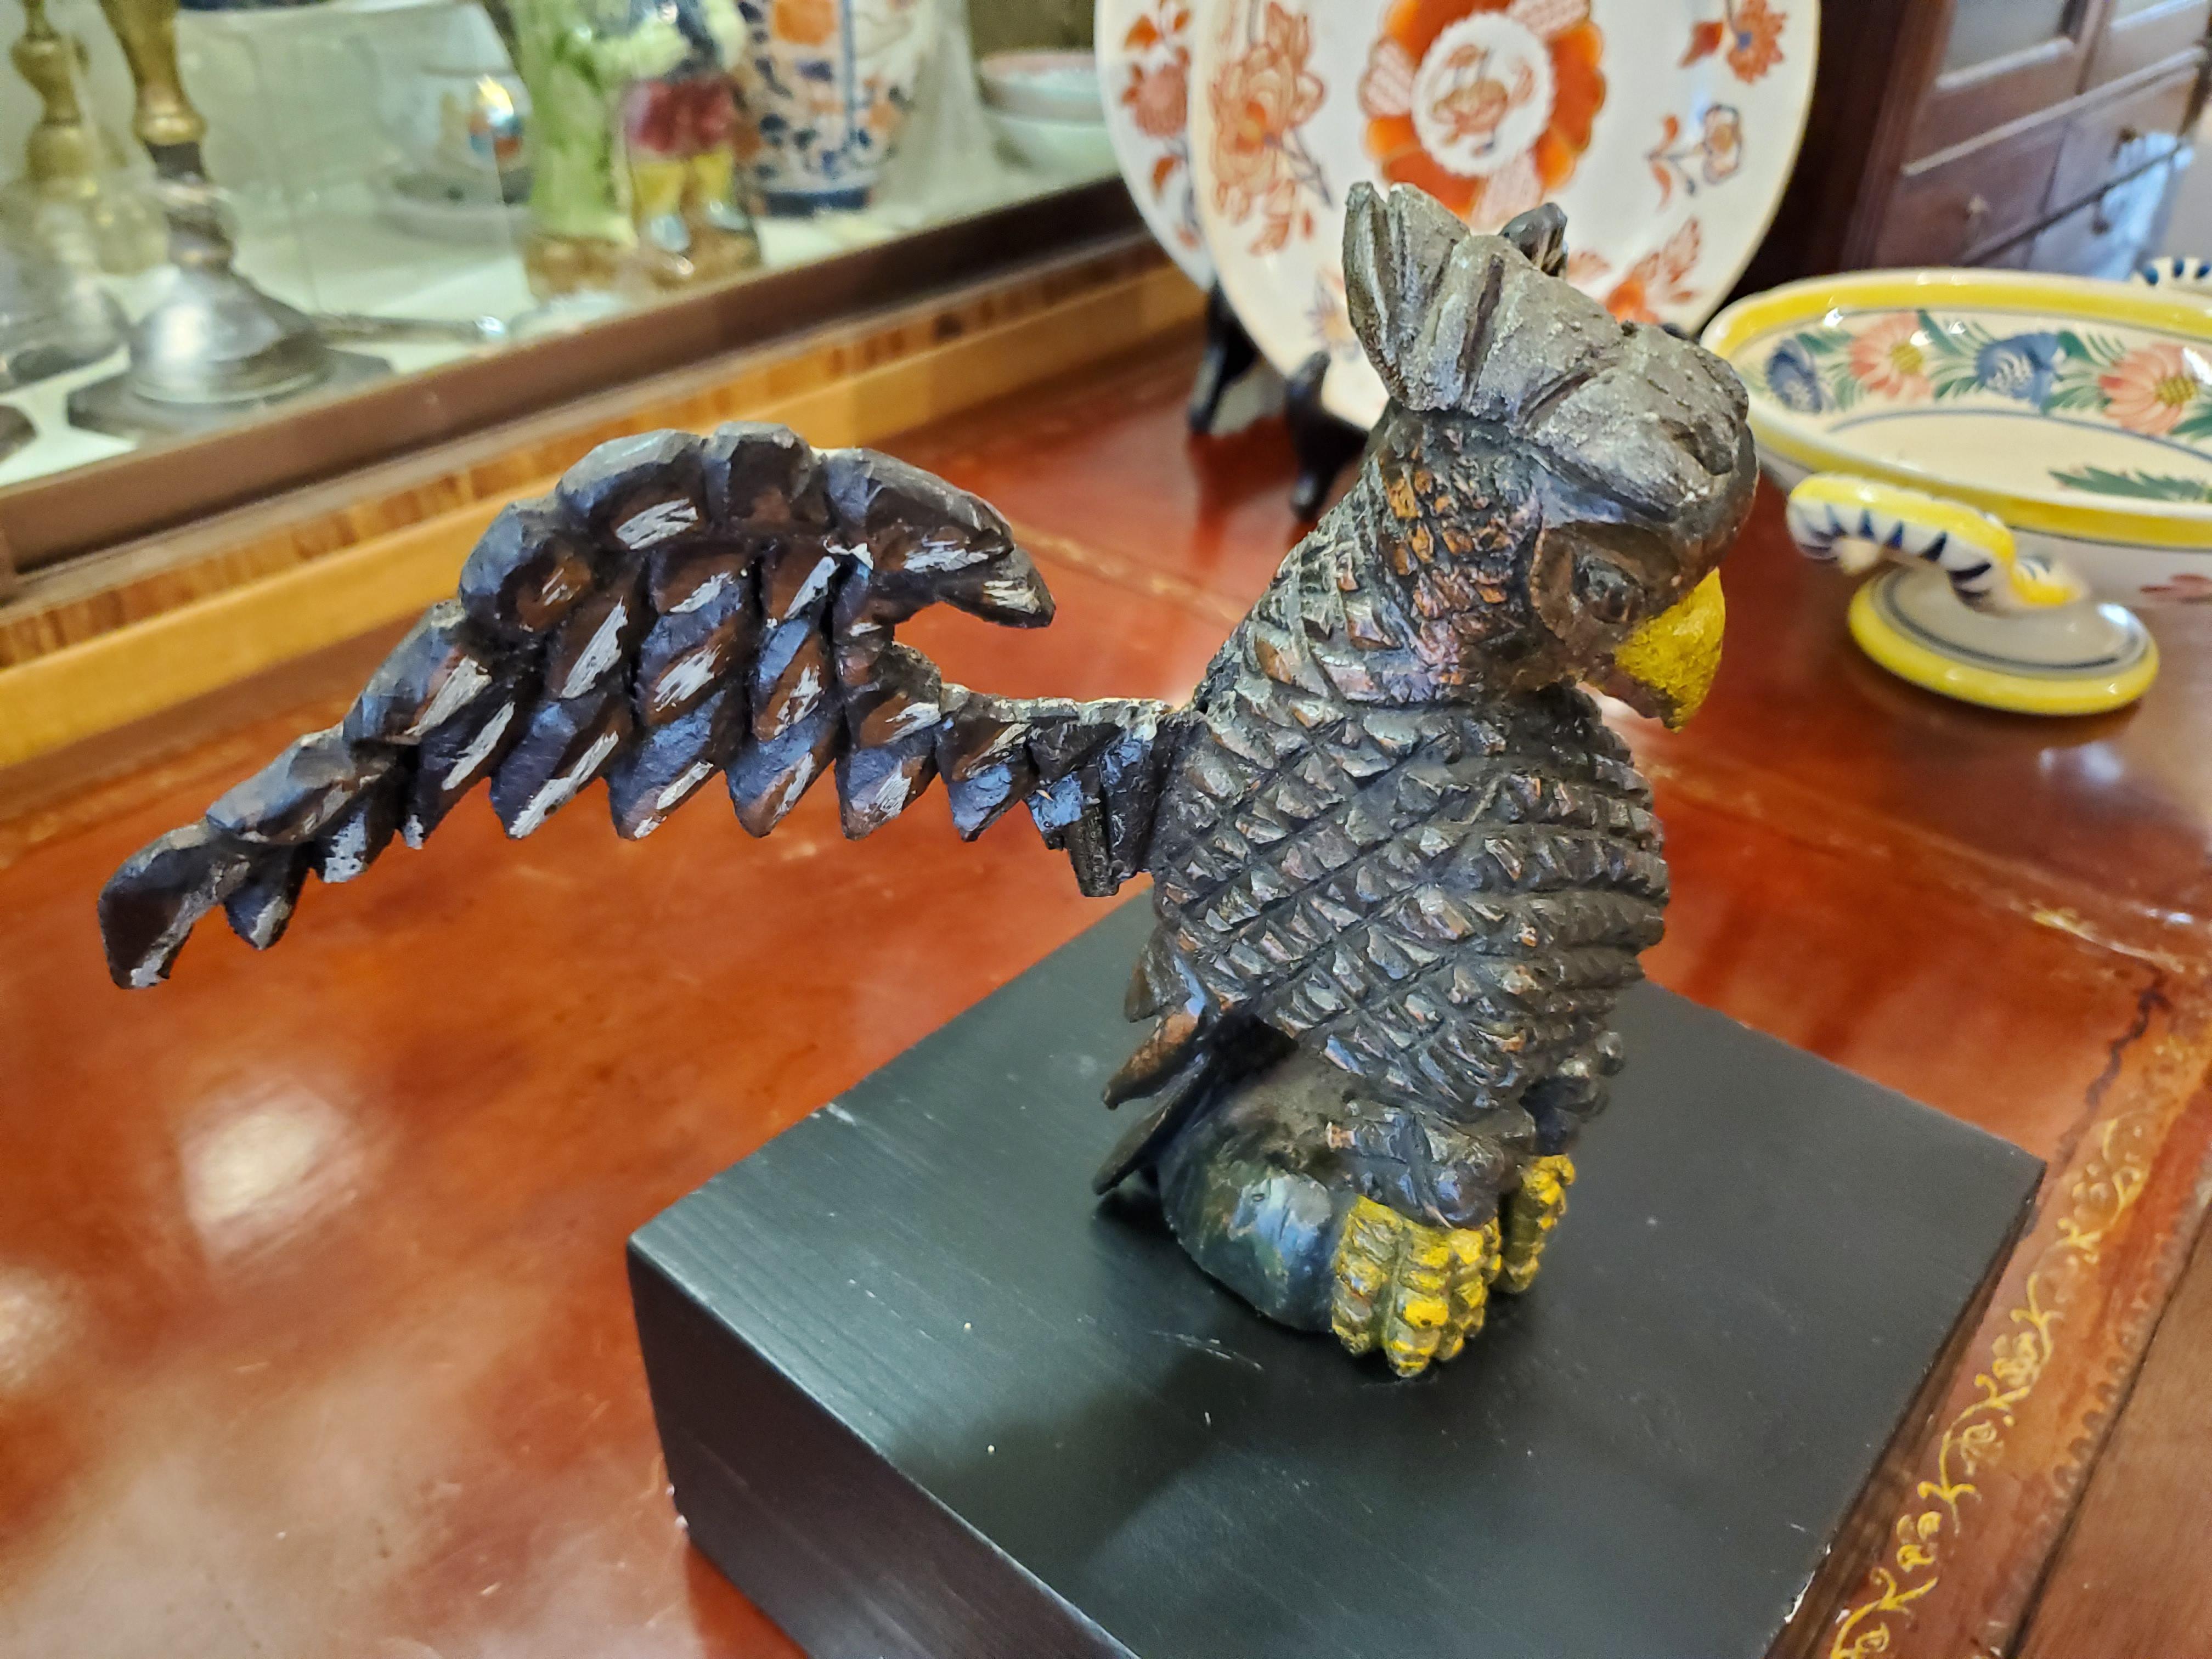 American Carved Folk Art Eagle made in the late 19th Century.

This carved wooden Eagle 11.5 inches wide by 6.5 inches deep by 9.5 inches tall including the later base.

Resembling a Schimmel but not attributed to the maker. 

This is a carved and